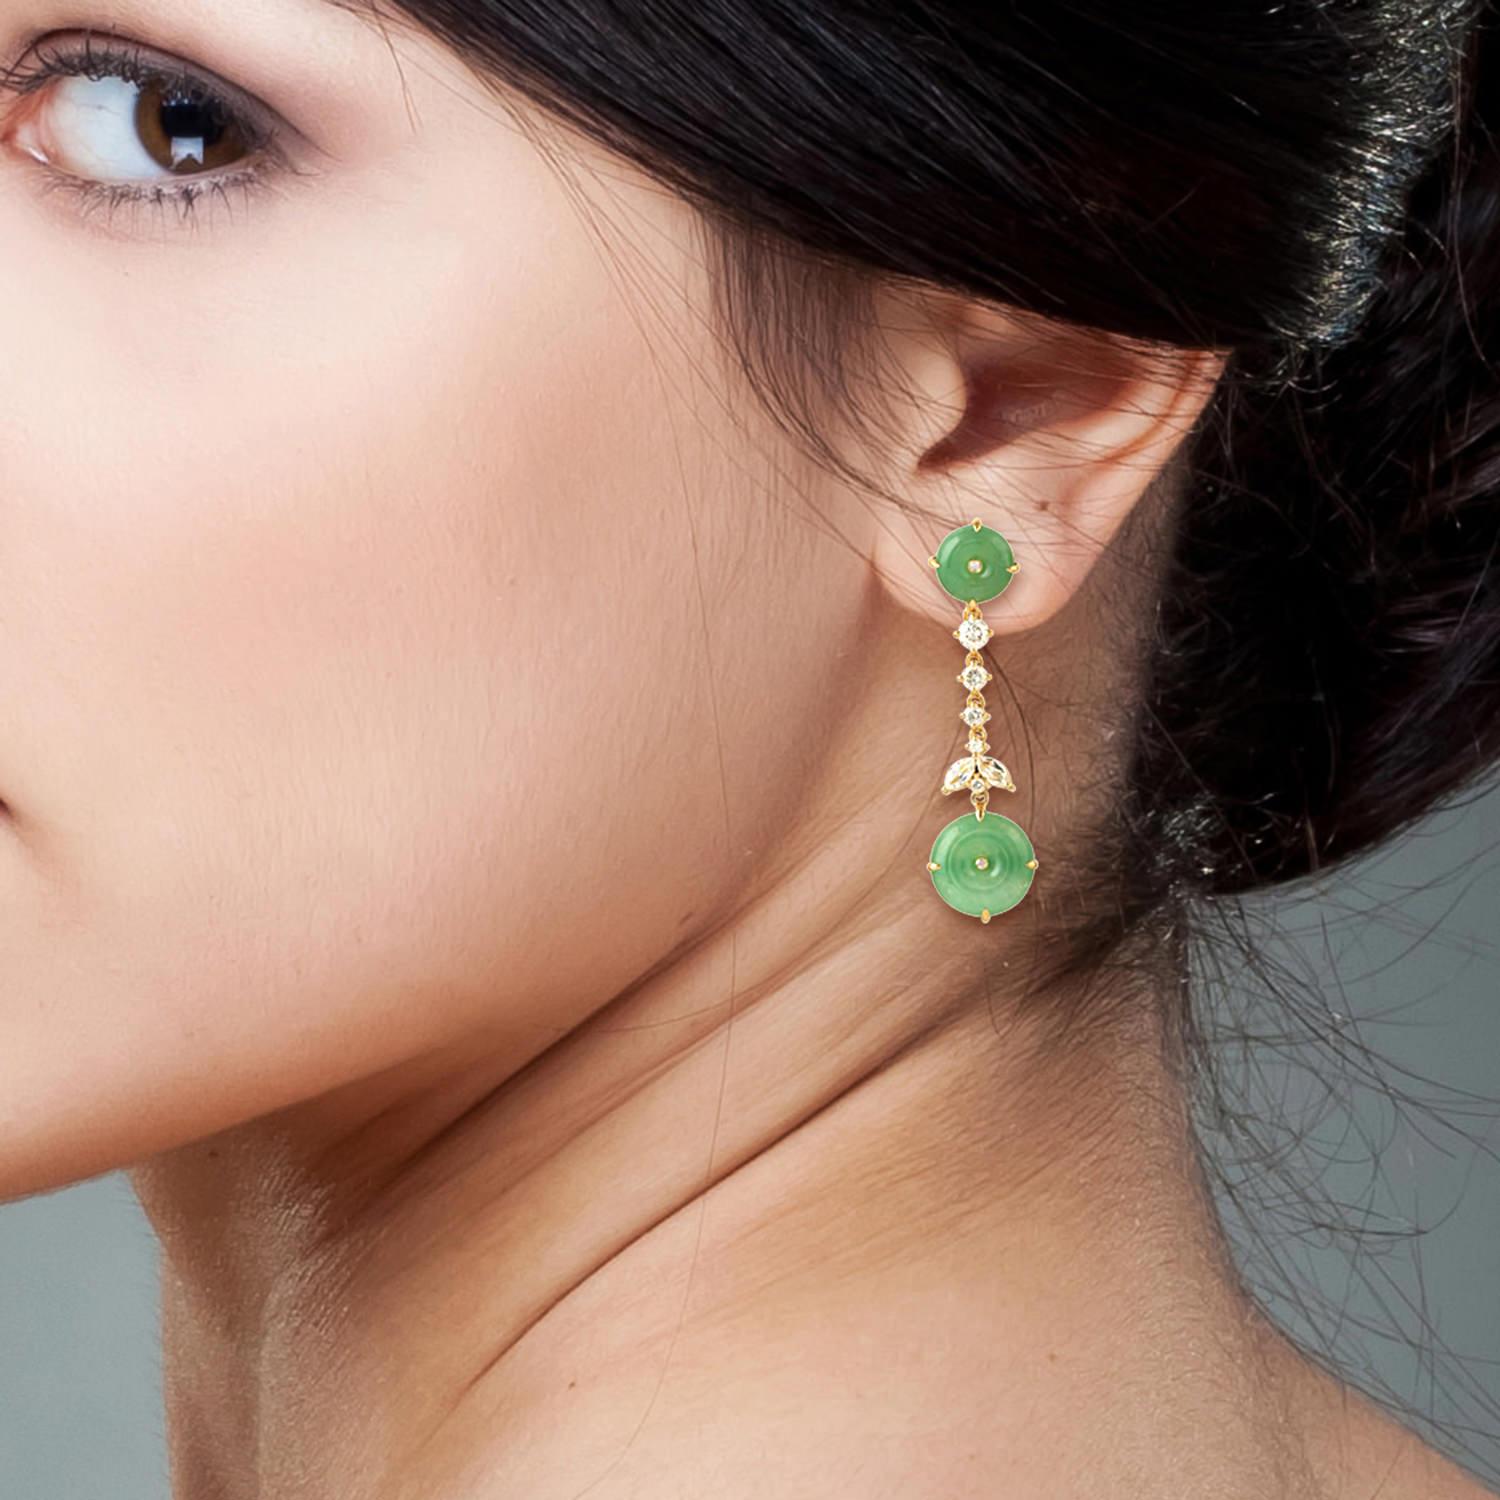 Handcrafted from 14-karat yellow gold, these stunning earrings are set with 9.64 carats Jade, .46 carats sapphire and .58 carats of sparkling diamonds.

FOLLOW  MEGHNA JEWELS storefront to view the latest collection & exclusive pieces.  Meghna